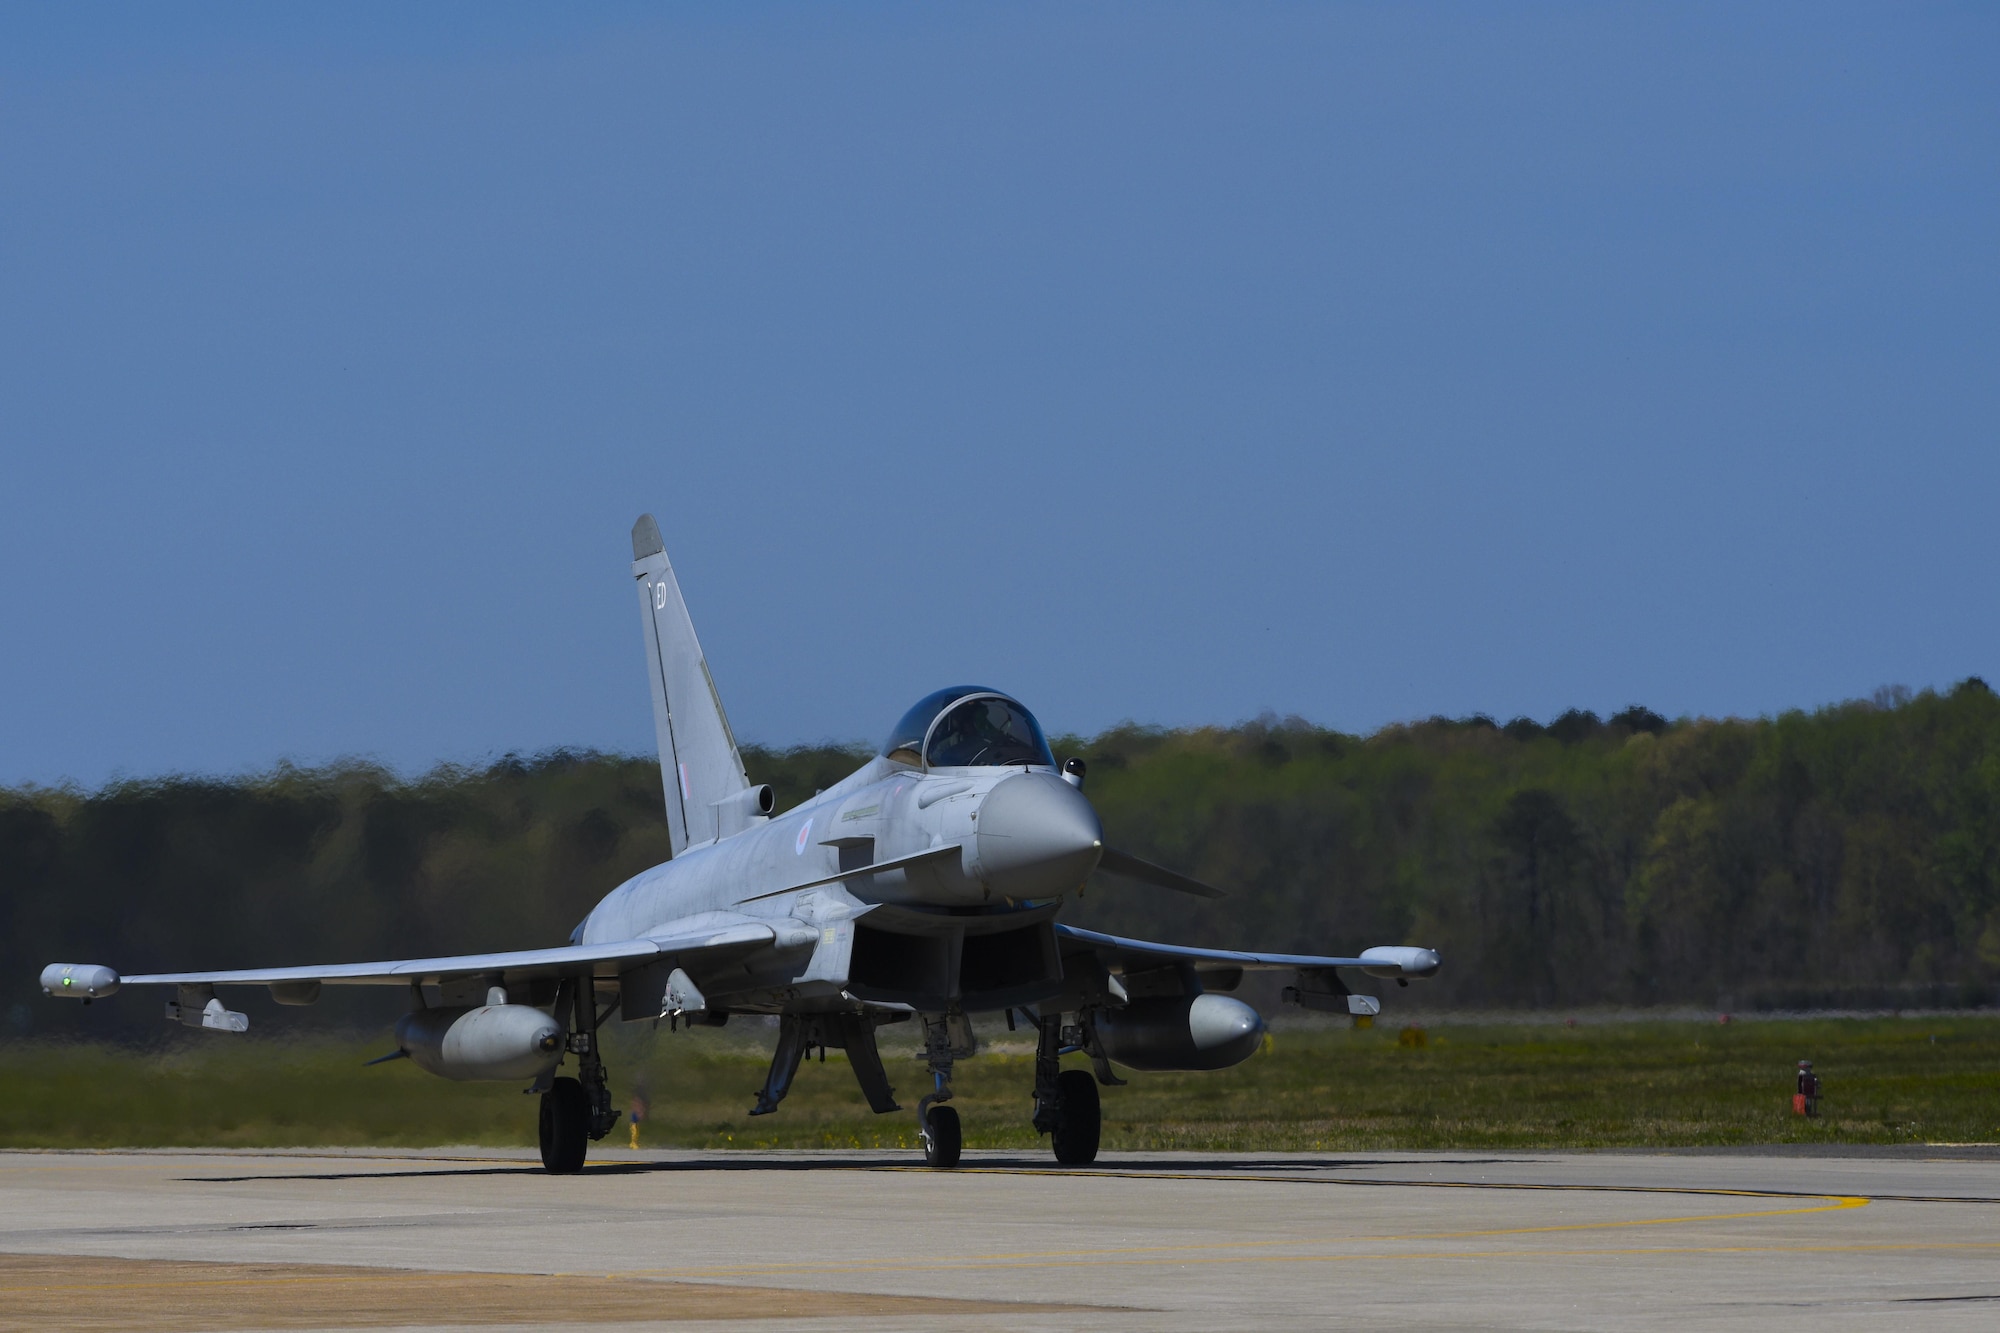 A Royal air force Eurofighter Typhoon, taxis on the runway during ATLANTIC TRIDENT 17 at Joint Base Langley-Eustis April 10, 2017. The exercise was designed to encourage sharing tactics, techniques and procedures with French air force and RAF partners against a range of potential threats, while leveraging U.S. Air Force fifth-generation capabilities. (U.S. Air Force photo/Airman 1st Class Anthony Nin Leclerec)